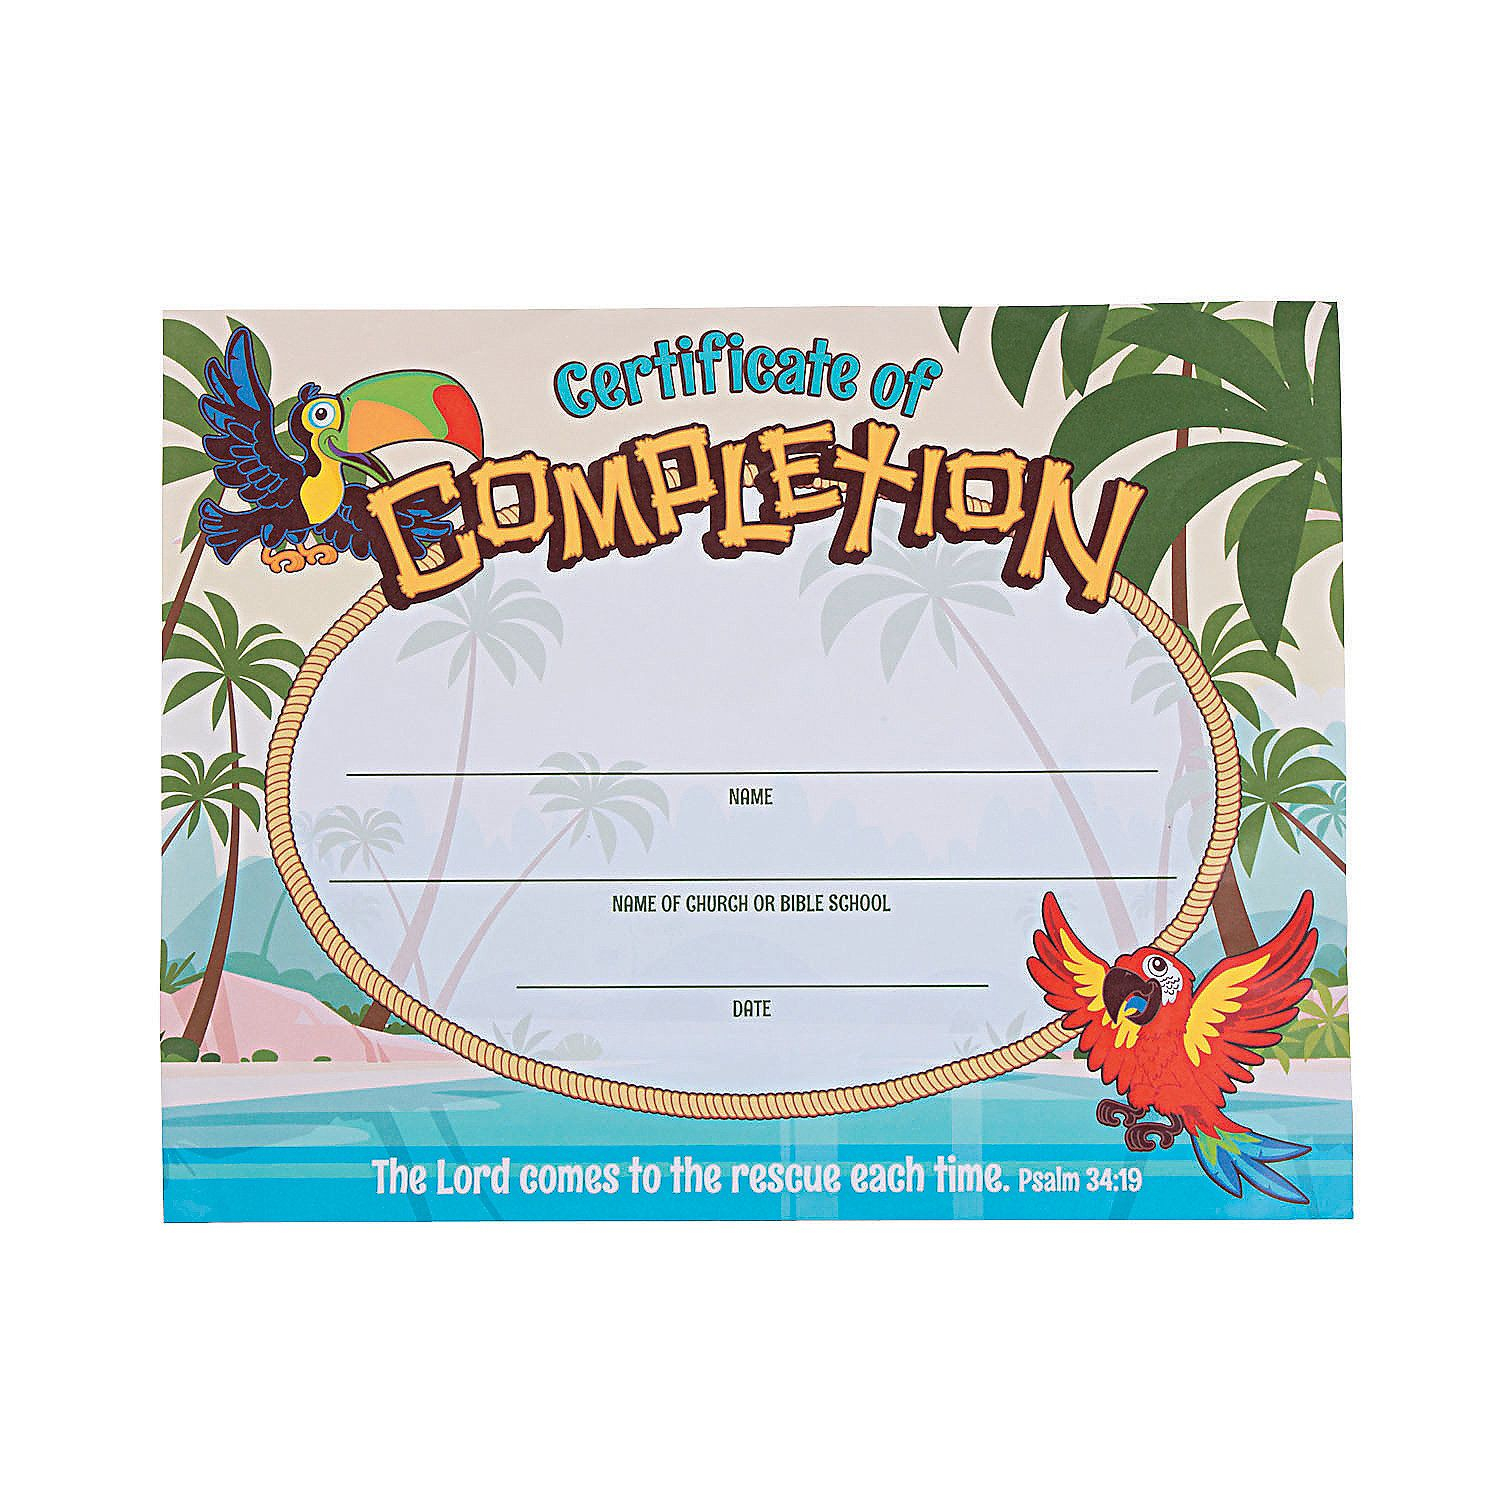 Island Vbs Certificates Of Completion | Stuff I Designed For Pertaining To Free Vbs Certificate Templates